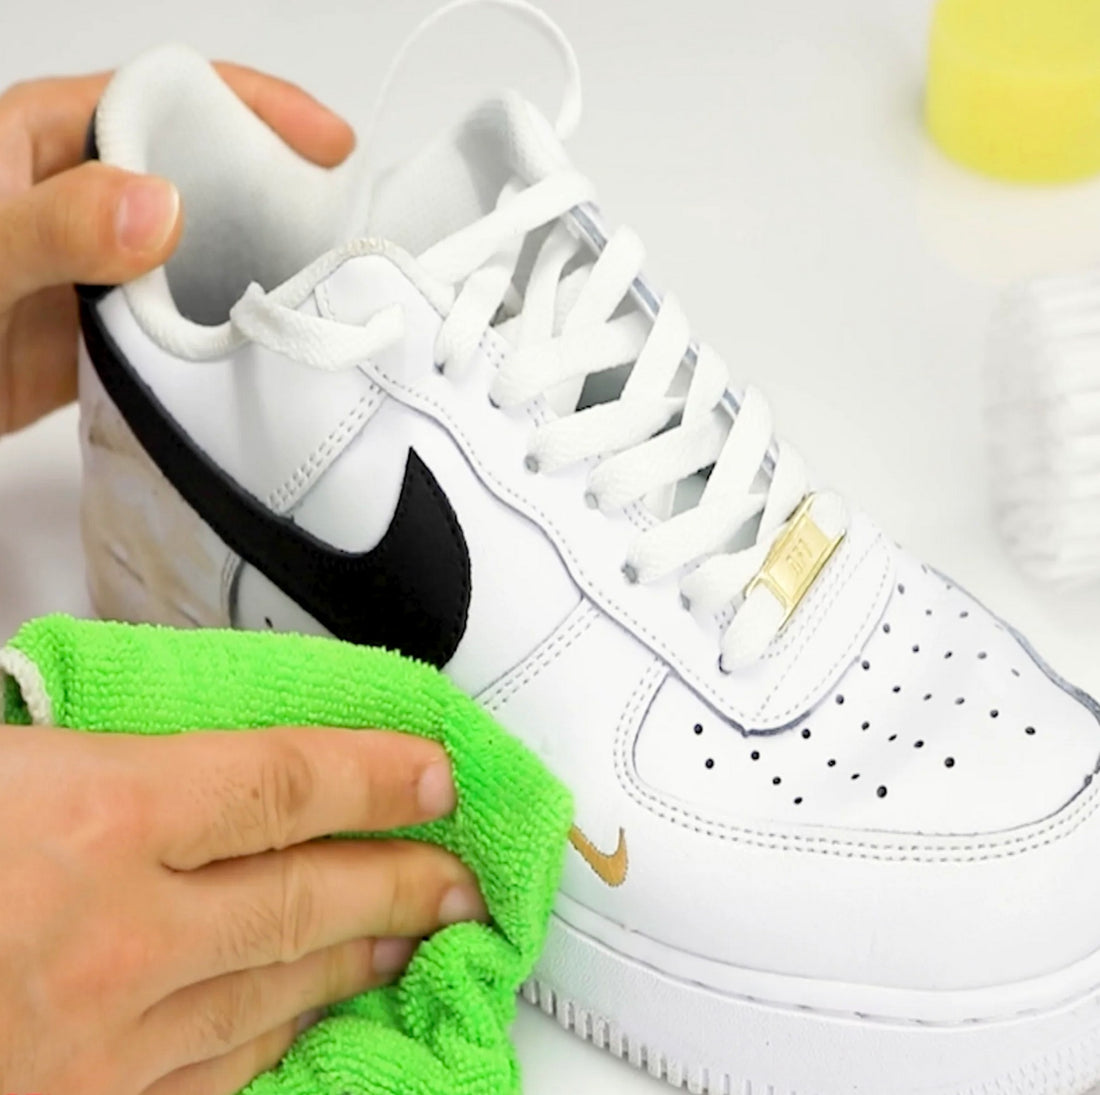 User What is the best thing to clean sneakers with and are electric shoe cleaners good?